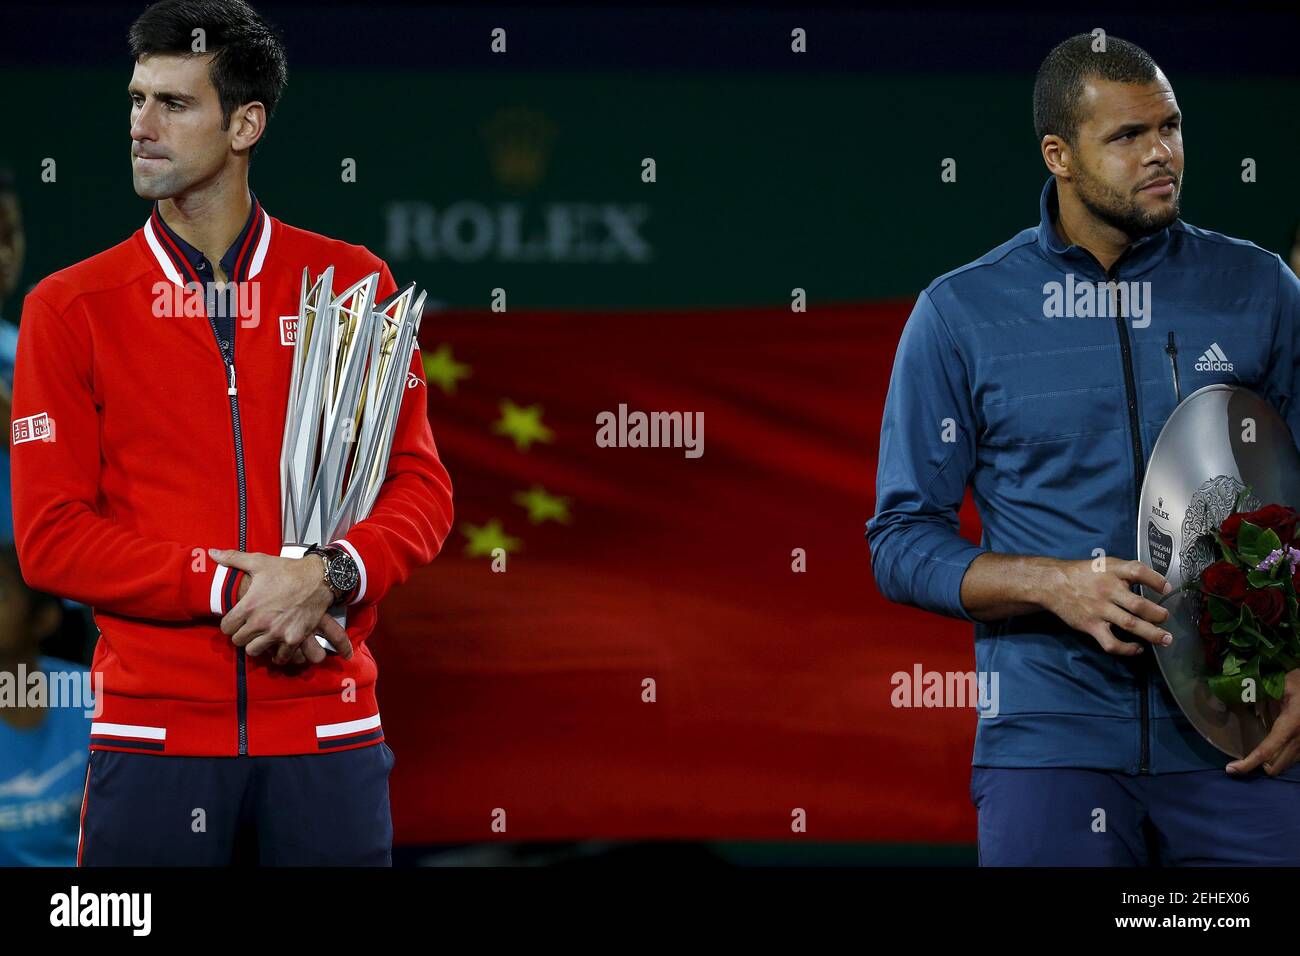 The winner Novak Djokovic of Serbia (L) and Jo-Wilfried Tsonga of France hold trophies after their men's singles final match at the Shanghai Masters tennis tournament in Shanghai, China, October 18, 2015.  REUTERS/Damir Sagolj   Picture Supplied by Action Images Stock Photo